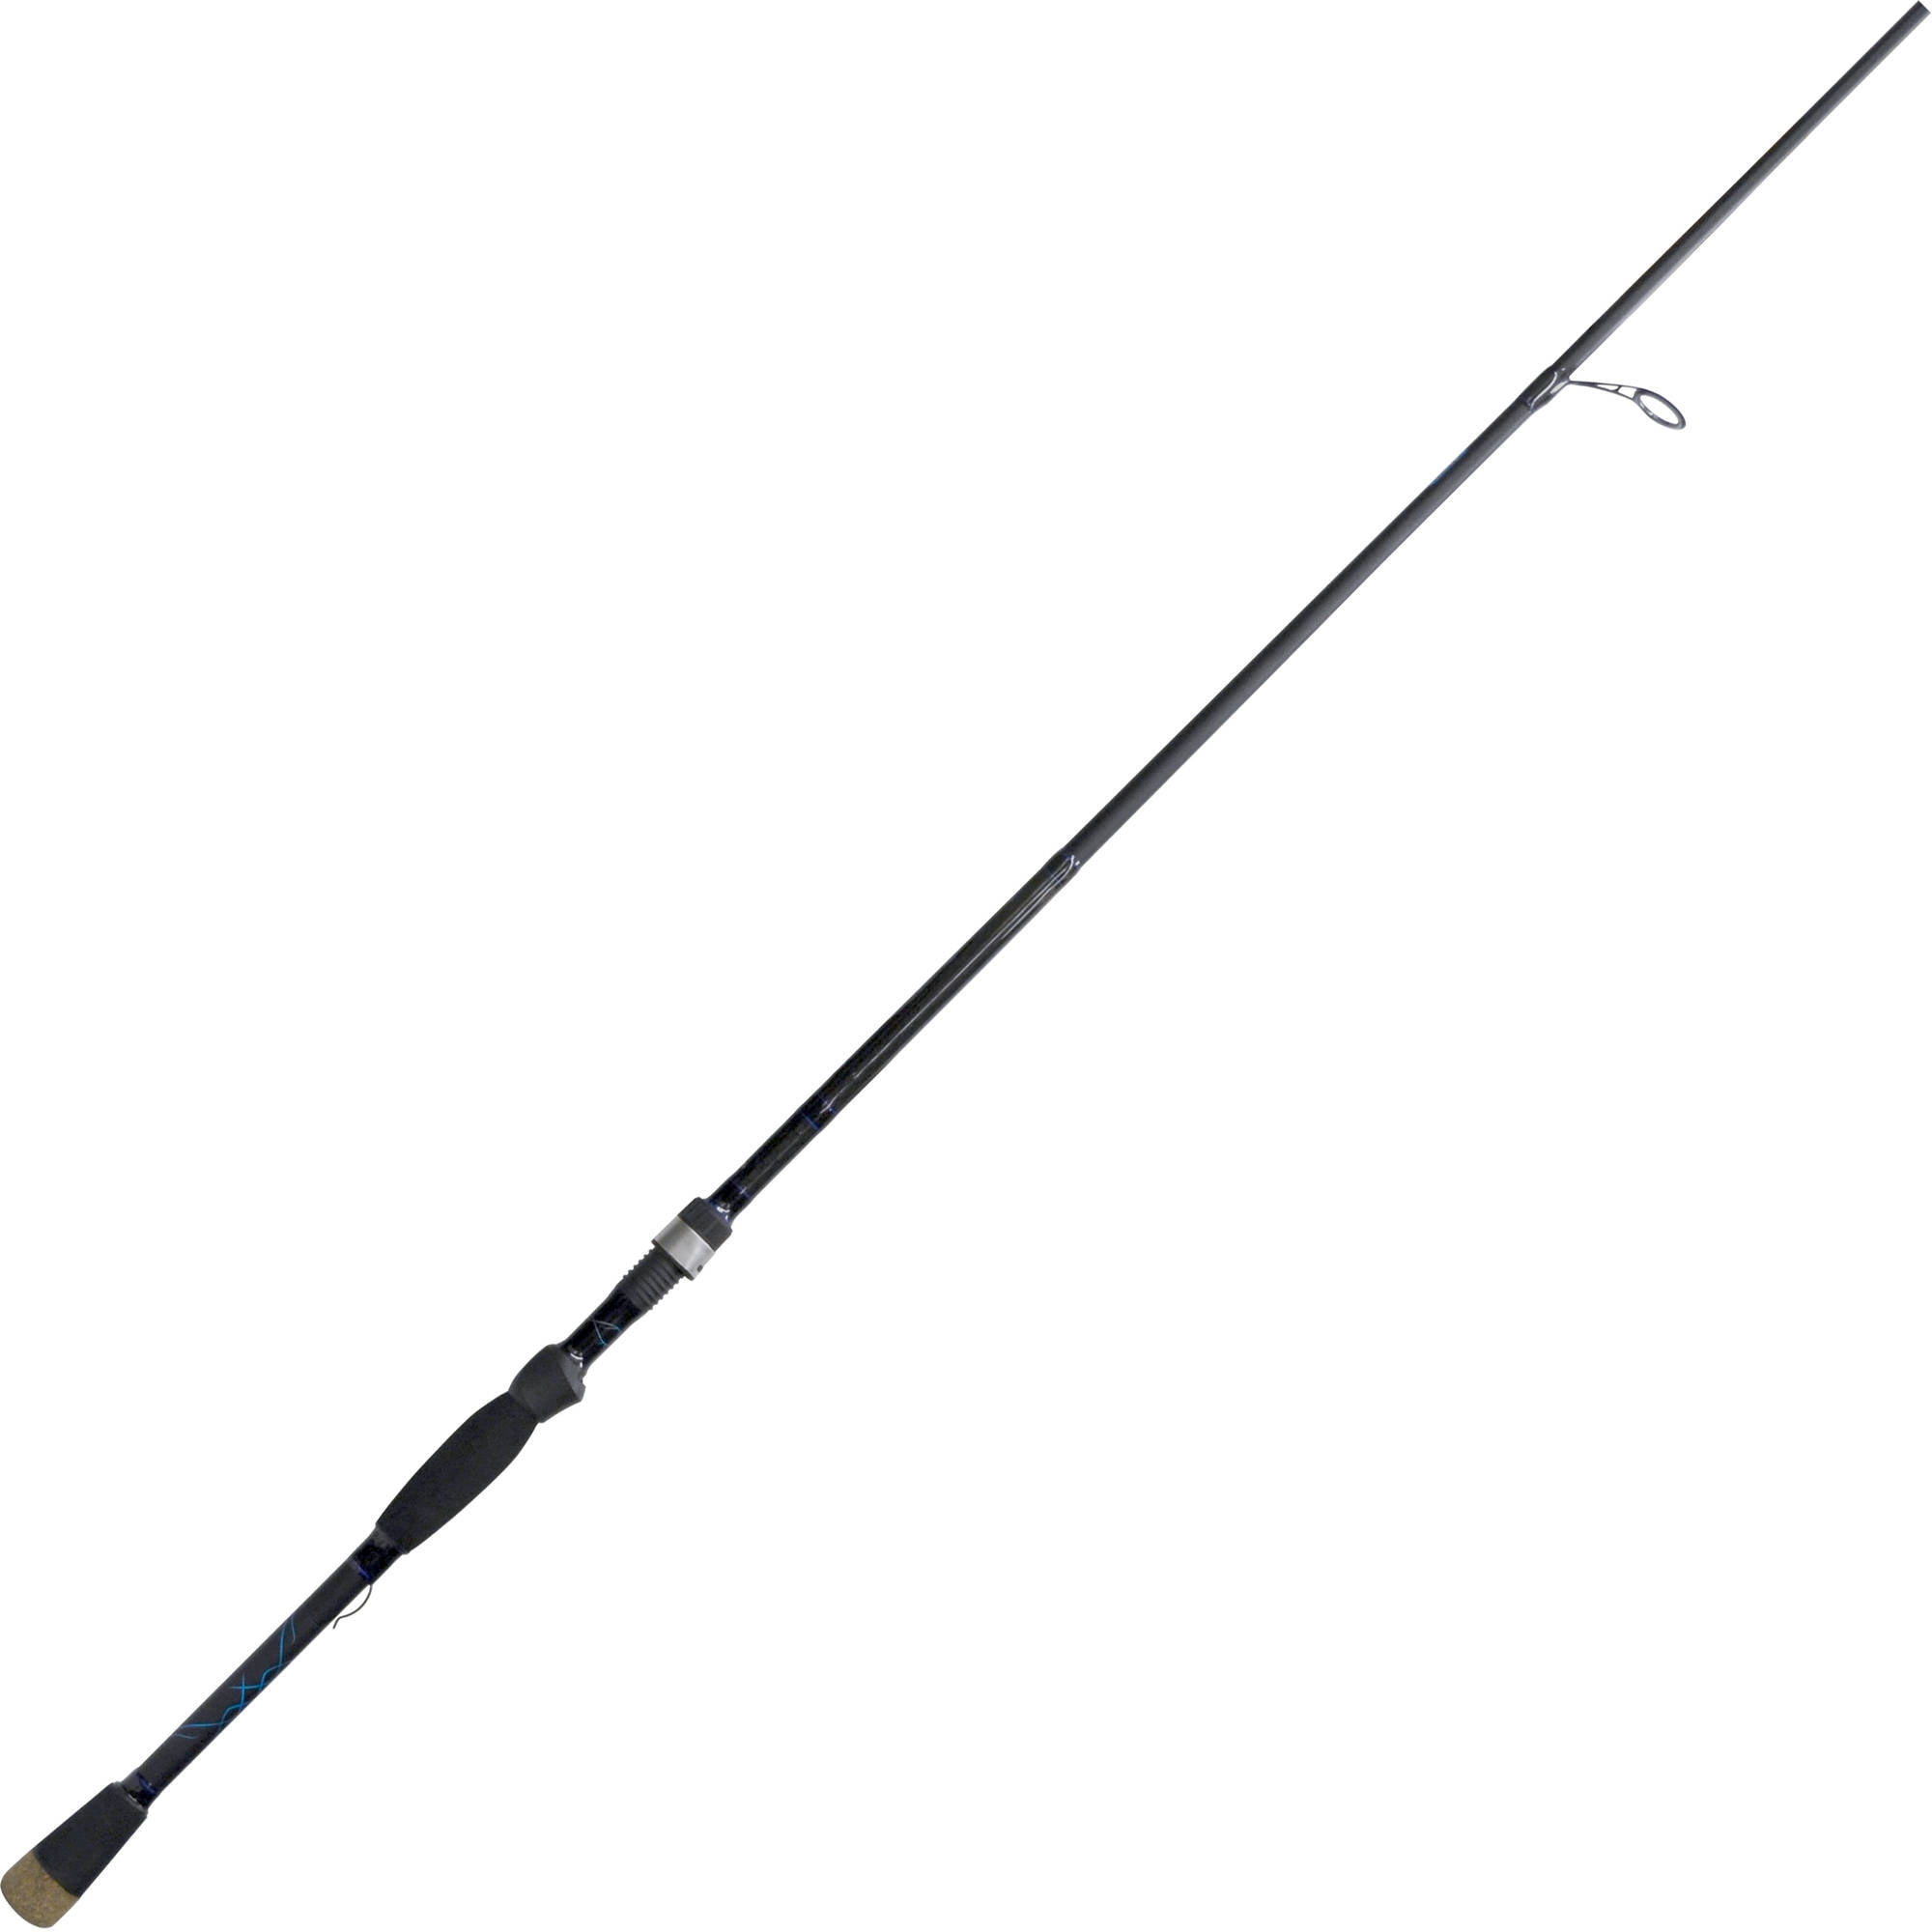 Eagle Claw,FISHING Rods,Fishing Rods,Insight Pro Advantage